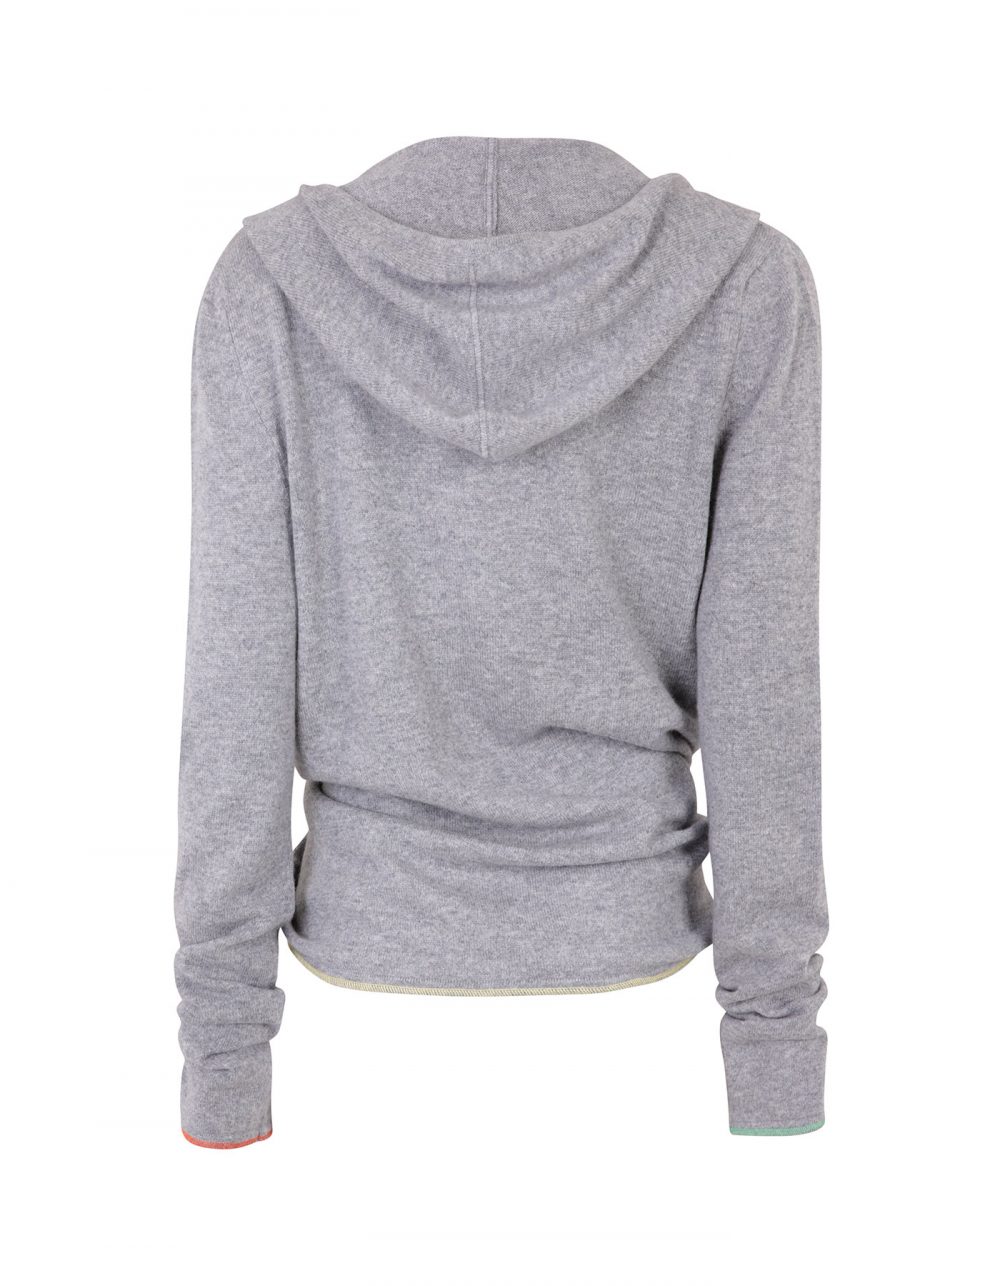 Back view of the malin darlin cashmere tie hoody isolated on white.